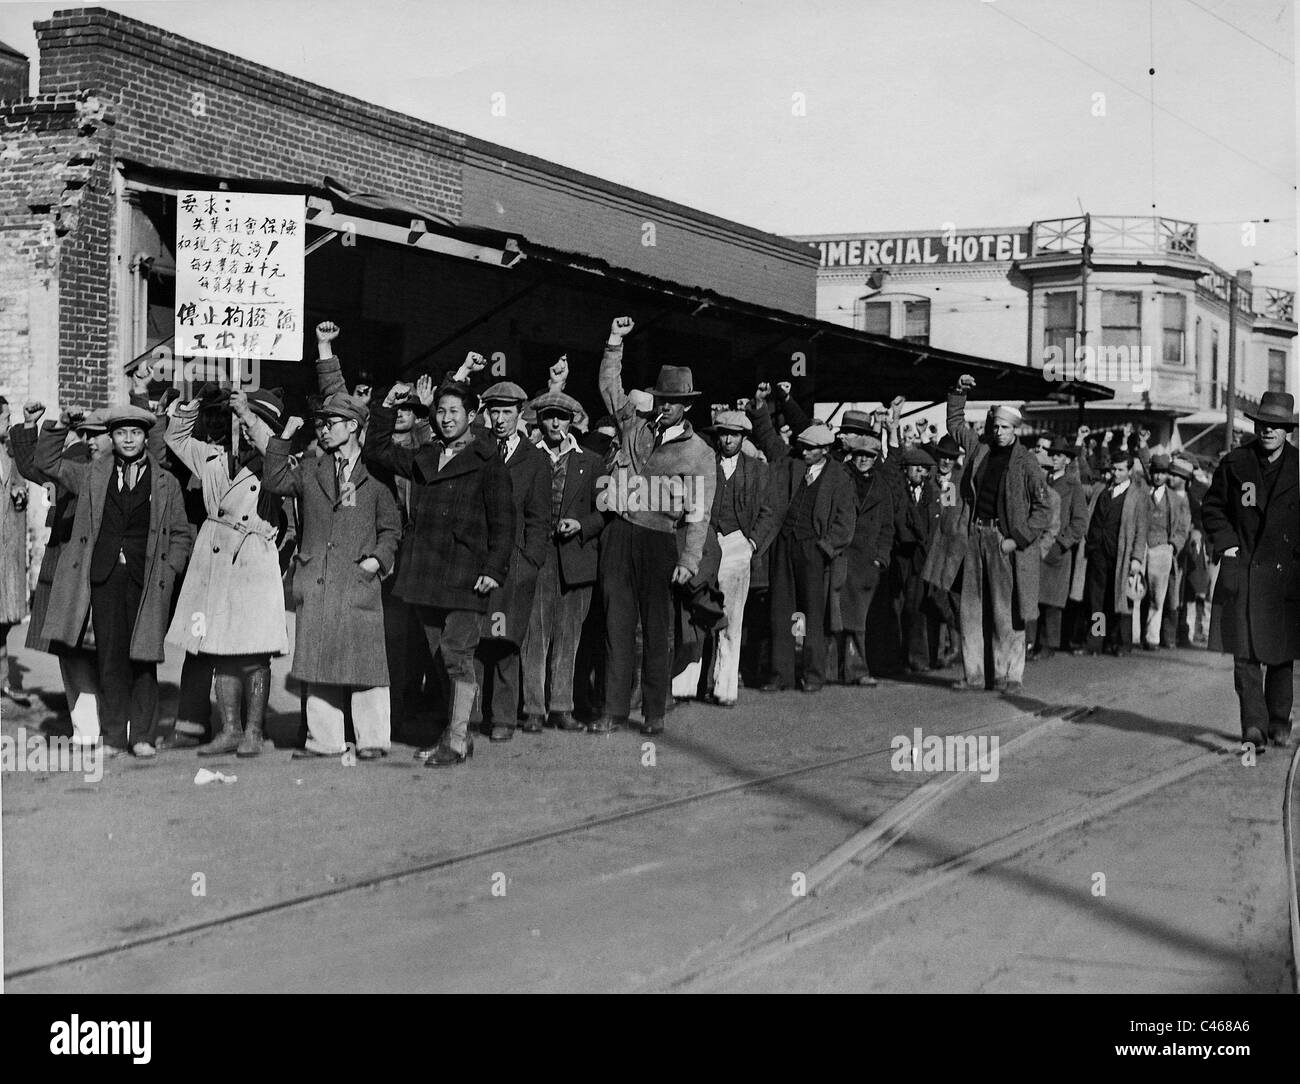 Unemployment demonstration during the Great Depression, 1932 Stock Photo